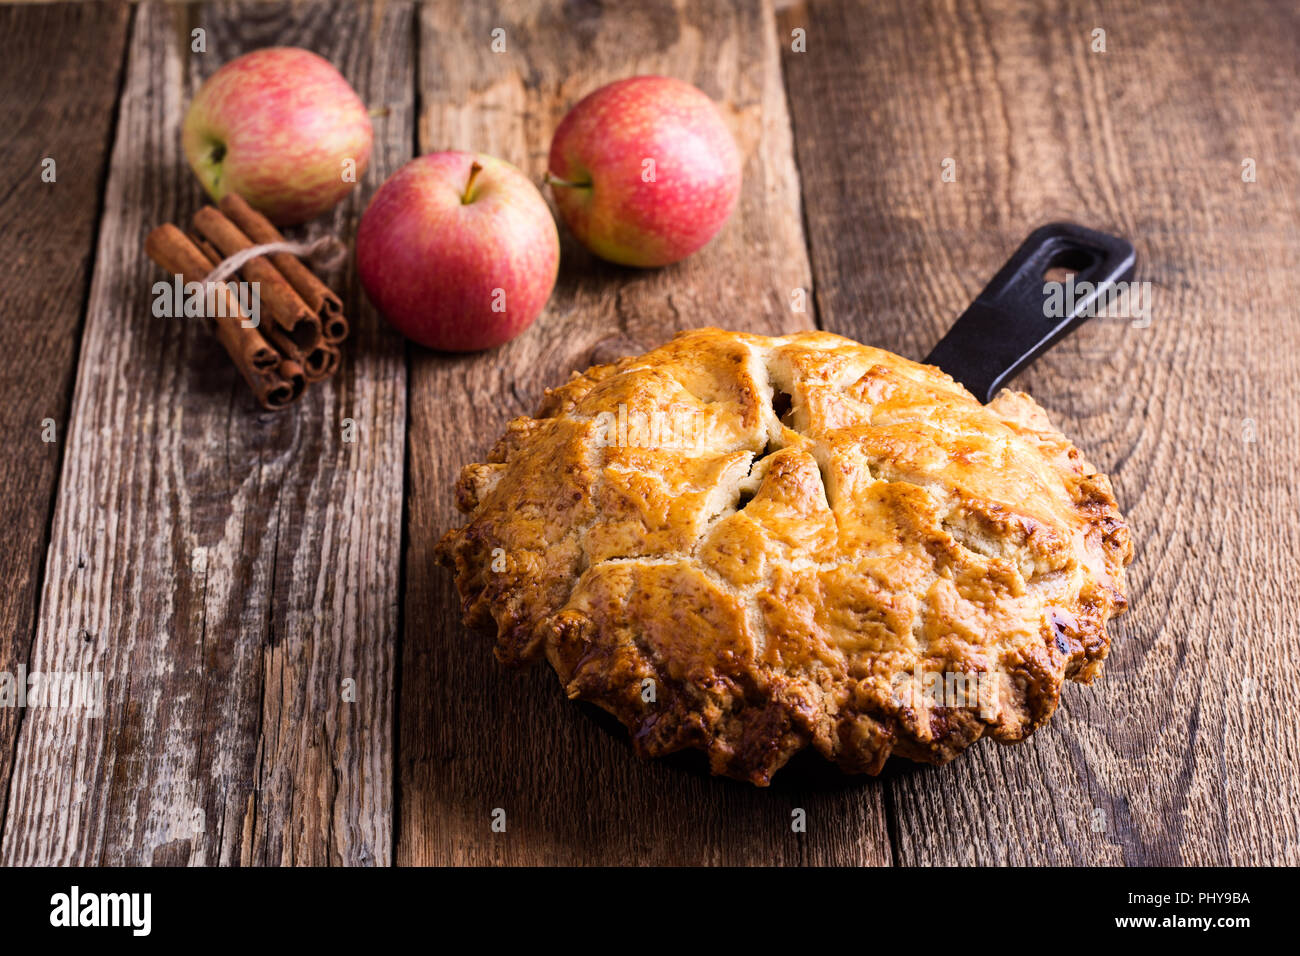 https://c8.alamy.com/comp/PHY9BA/apple-pie-in-cast-iron-skillet-on-rustic-wooden-table-traditional-autumn-cozy-dessert-PHY9BA.jpg